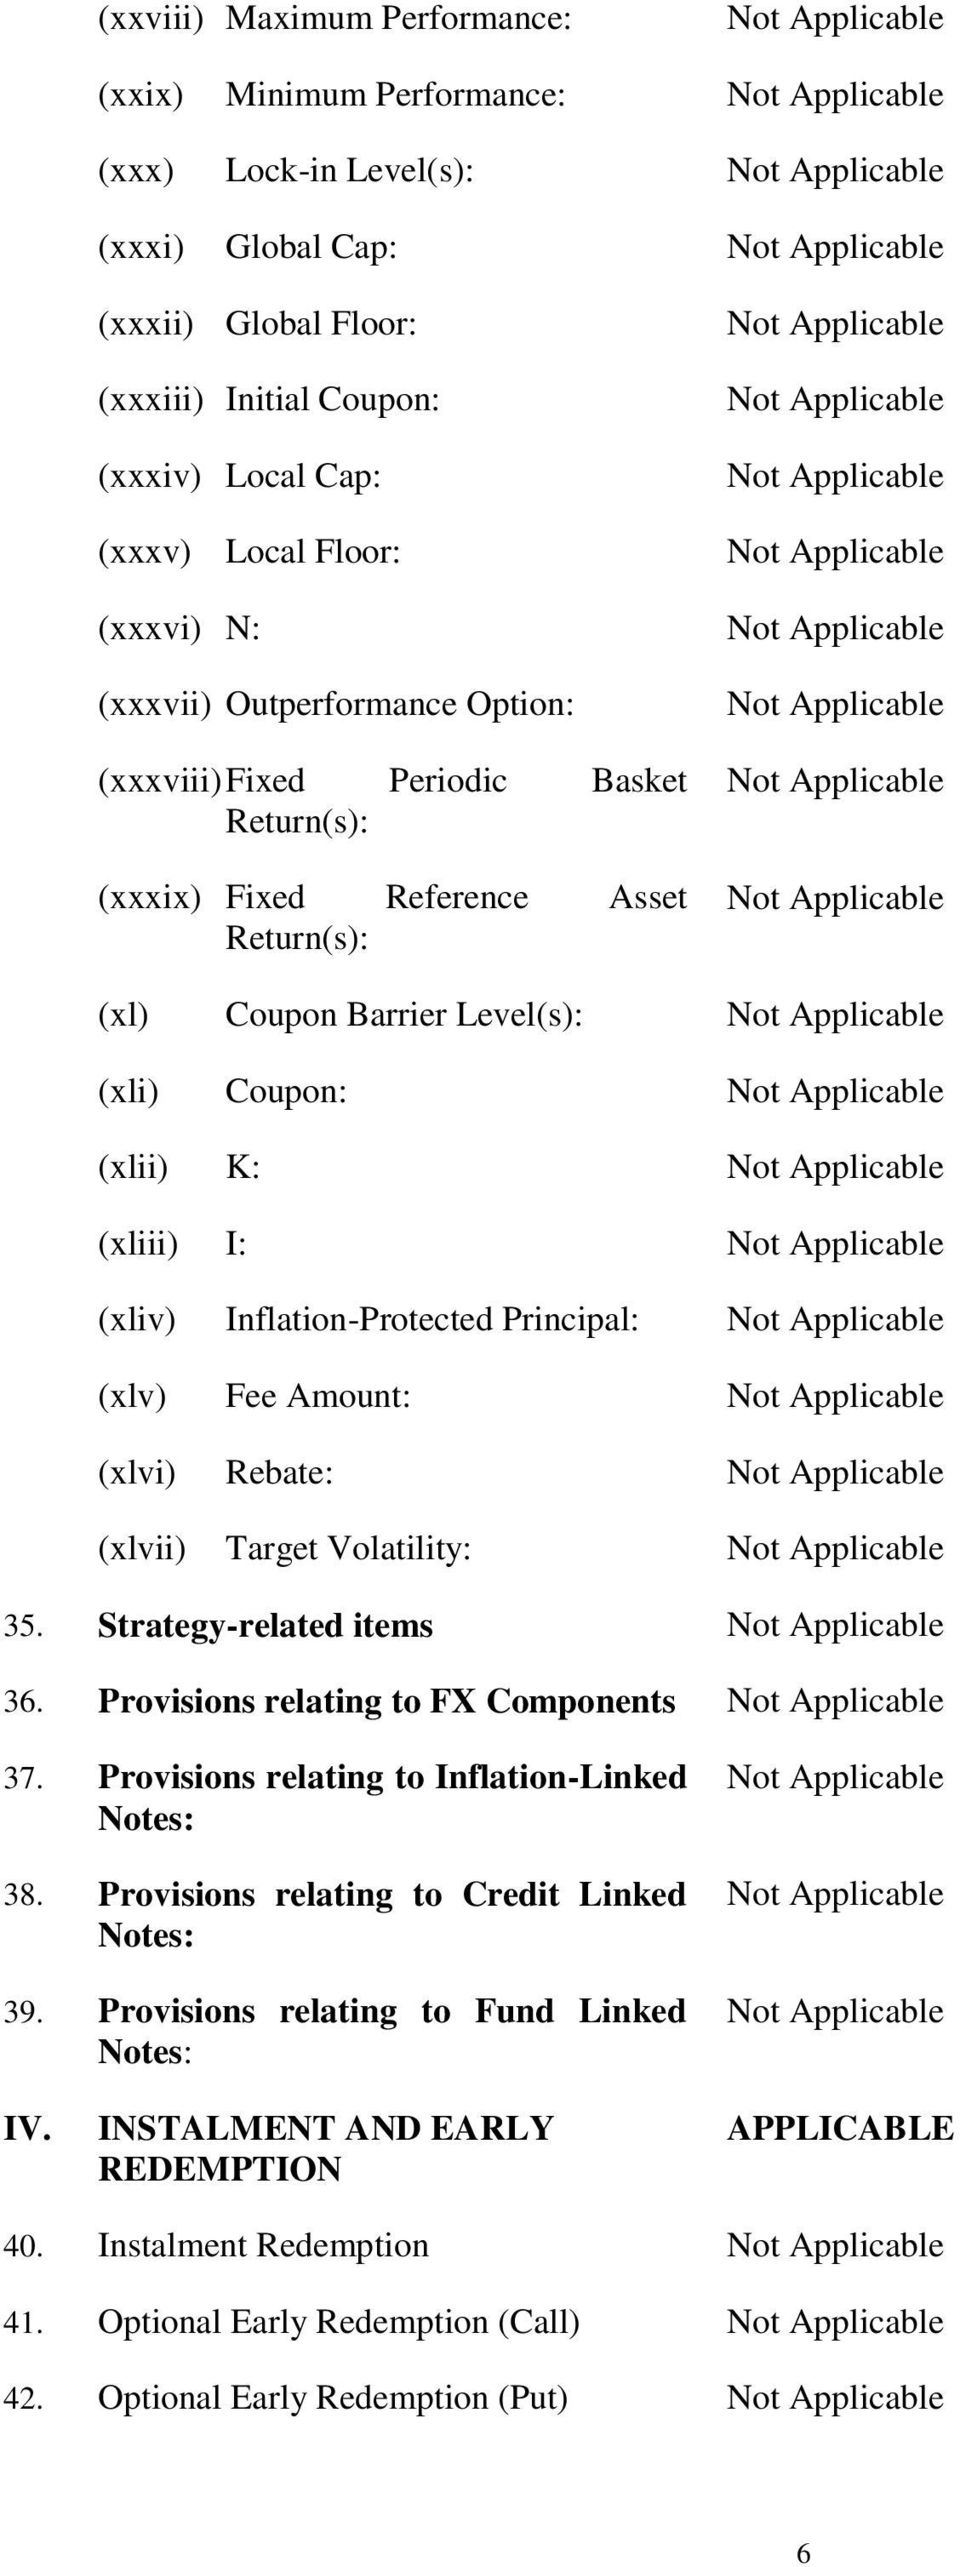 Inflation-Protected Principal: (xlv) Fee Amount: (xlvi) Rebate: (xlvii) Target Volatility: 35. Strategy-related items 36. Provisions relating to FX Components 37.